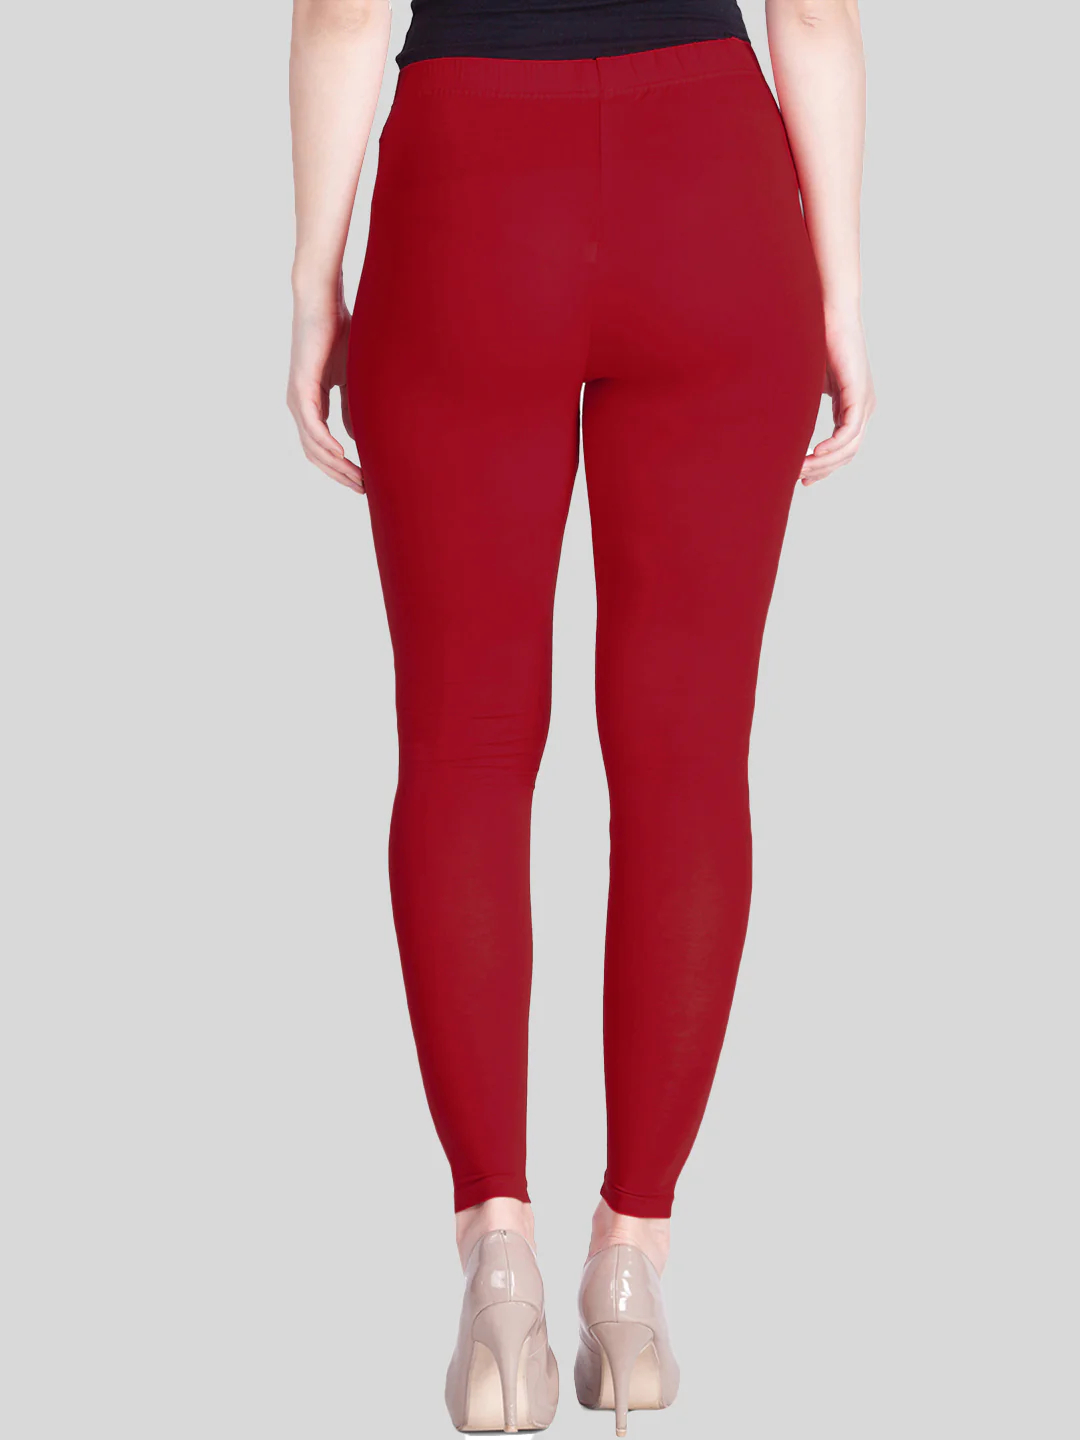 Red leggings women have become a popular choice in modern fashion, offering a vibrant and versatile option for both activewear and everyday ensembles.